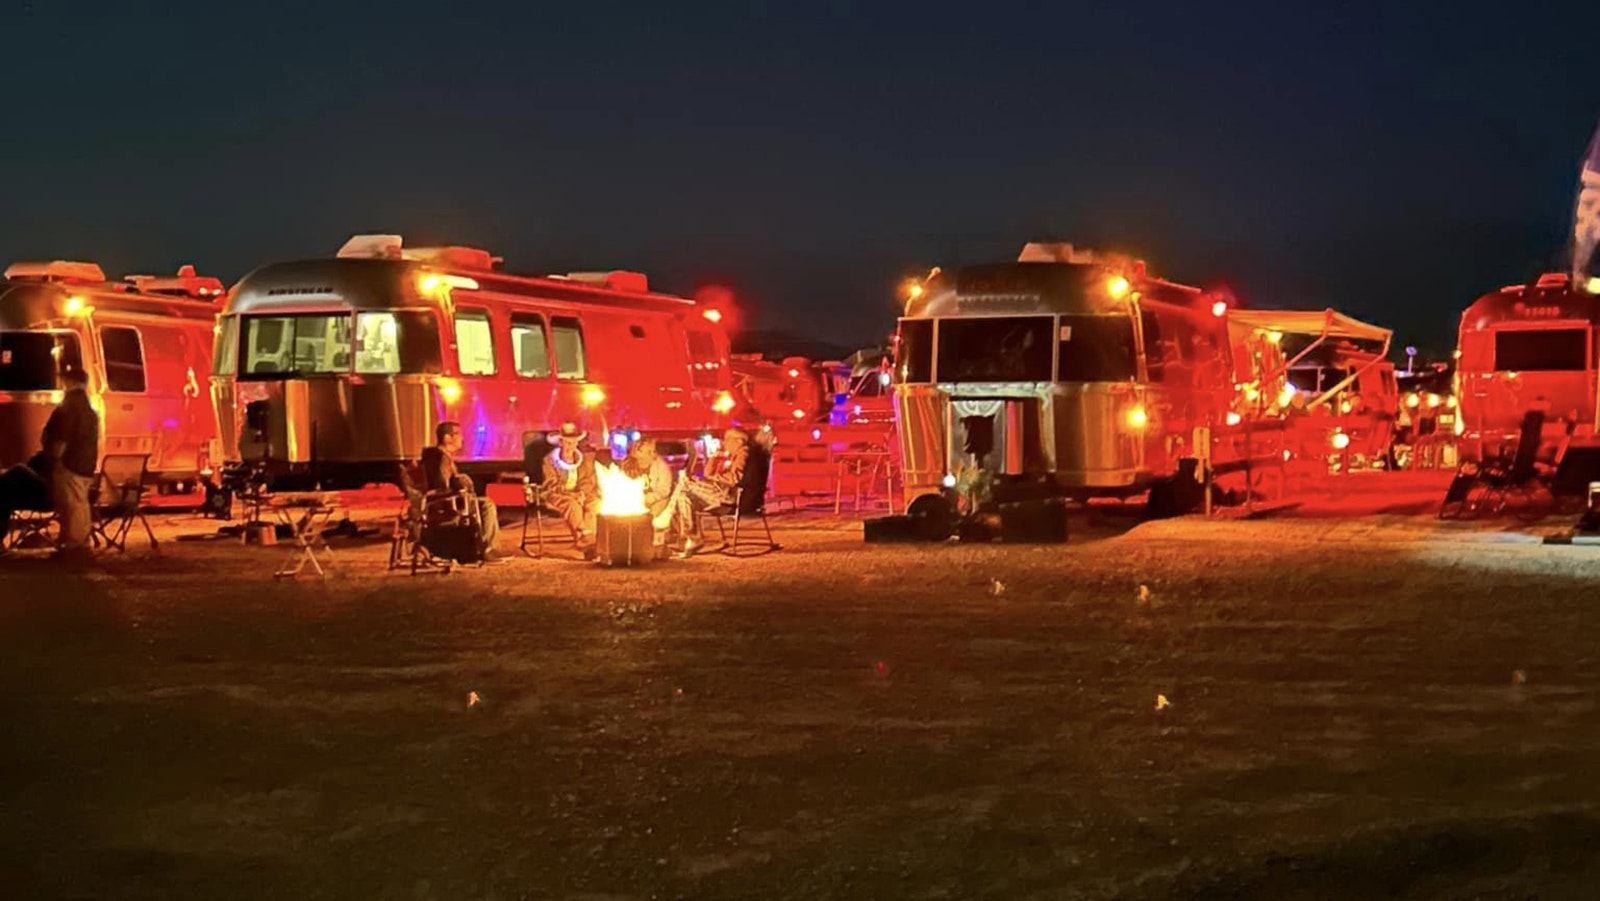 Airstreams aglow during a rally held at the Sweetwater Events Complex in Rock Springs.